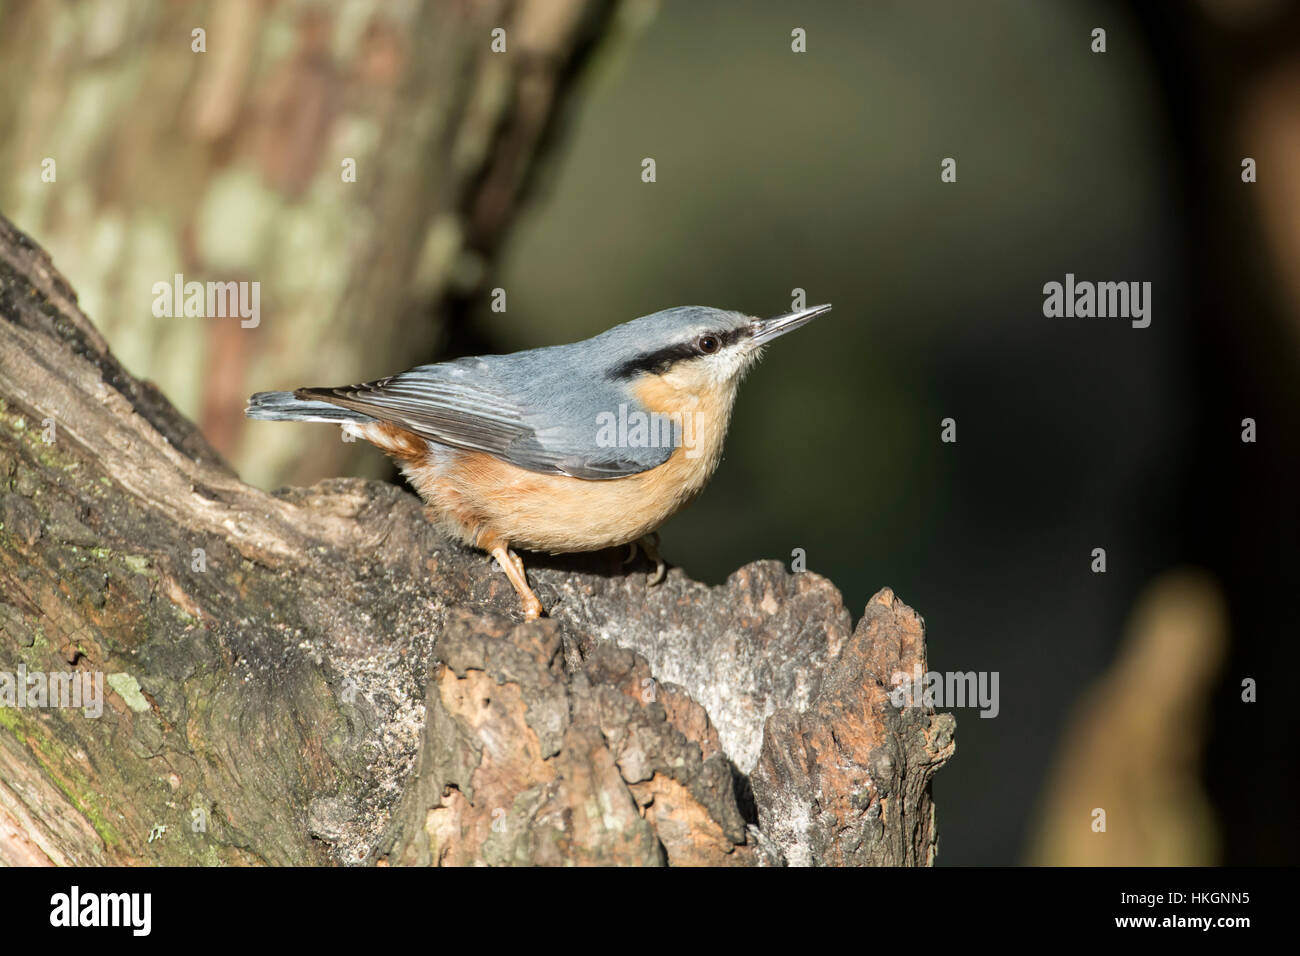 Nuthatch (Sitta europaea) foraging for food on a tree stump. Stock Photo